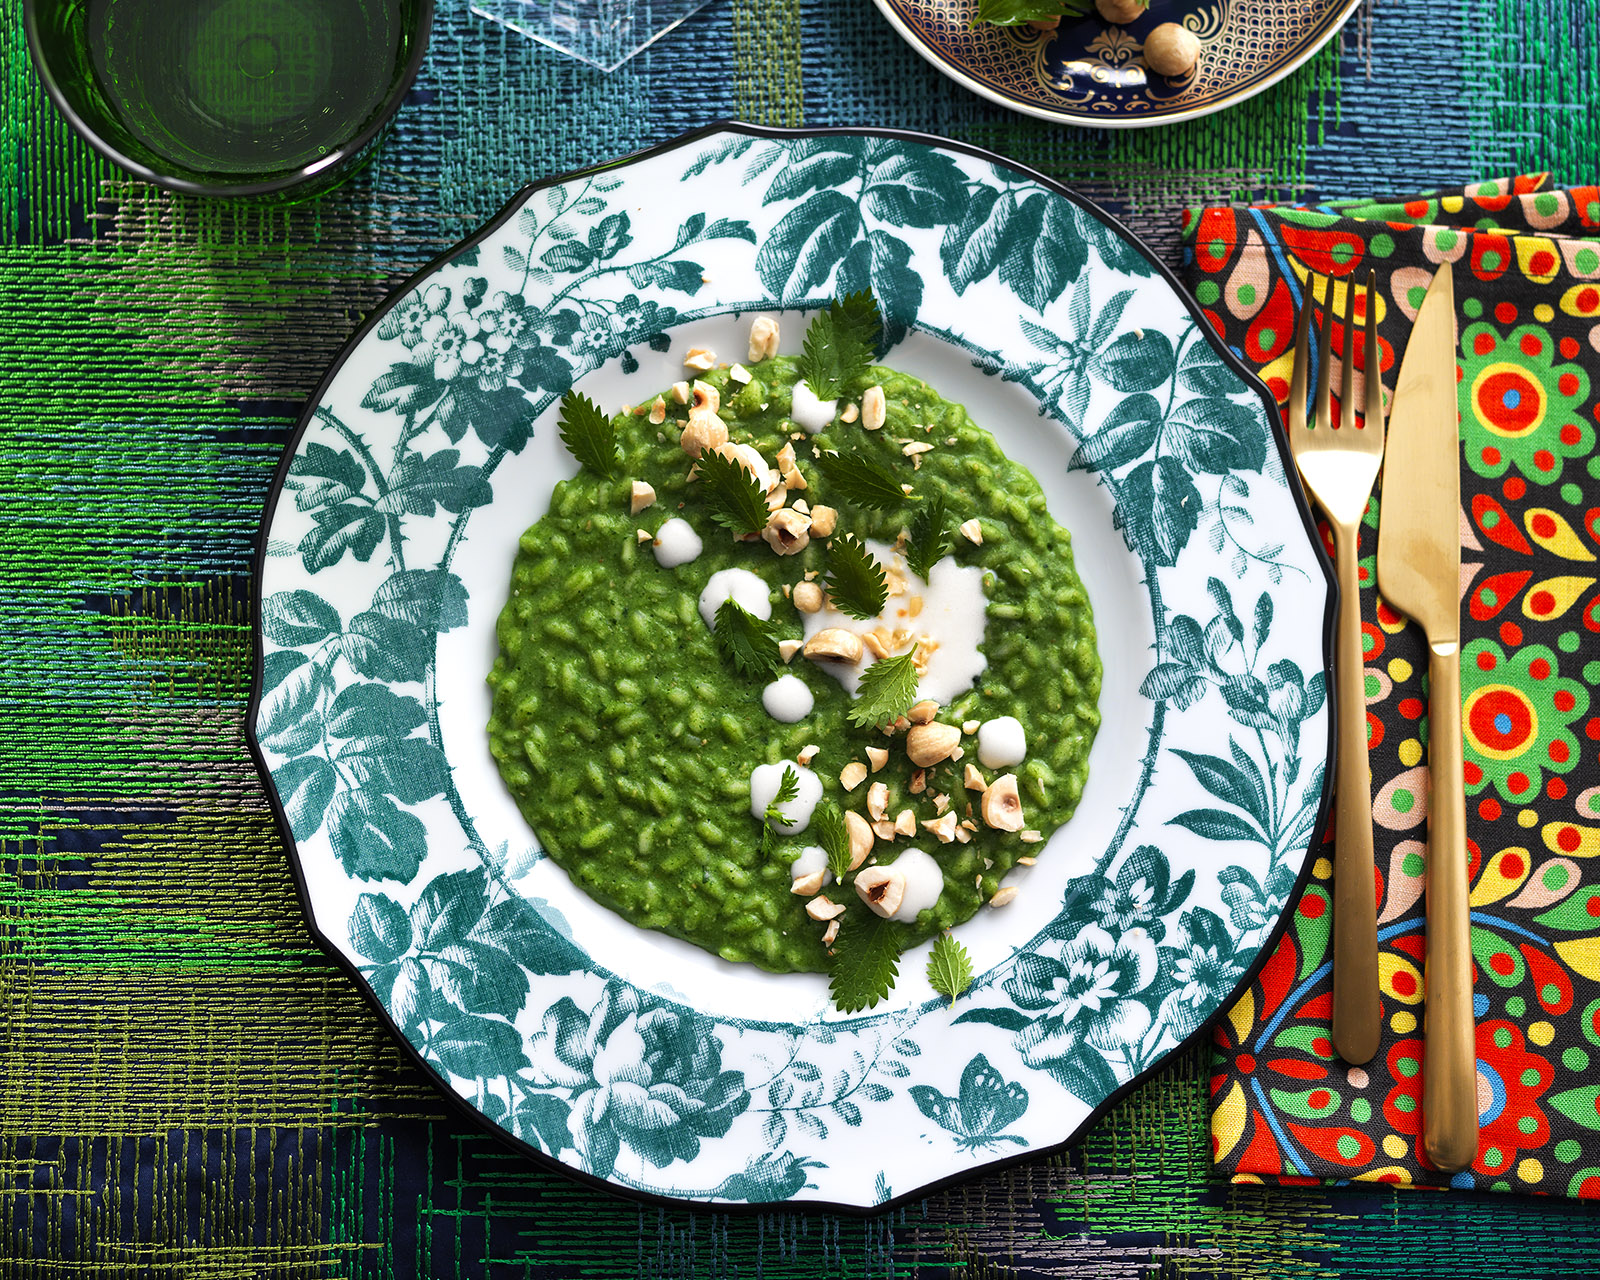 Risotto with nettles: our VIDEO RECIPE of March